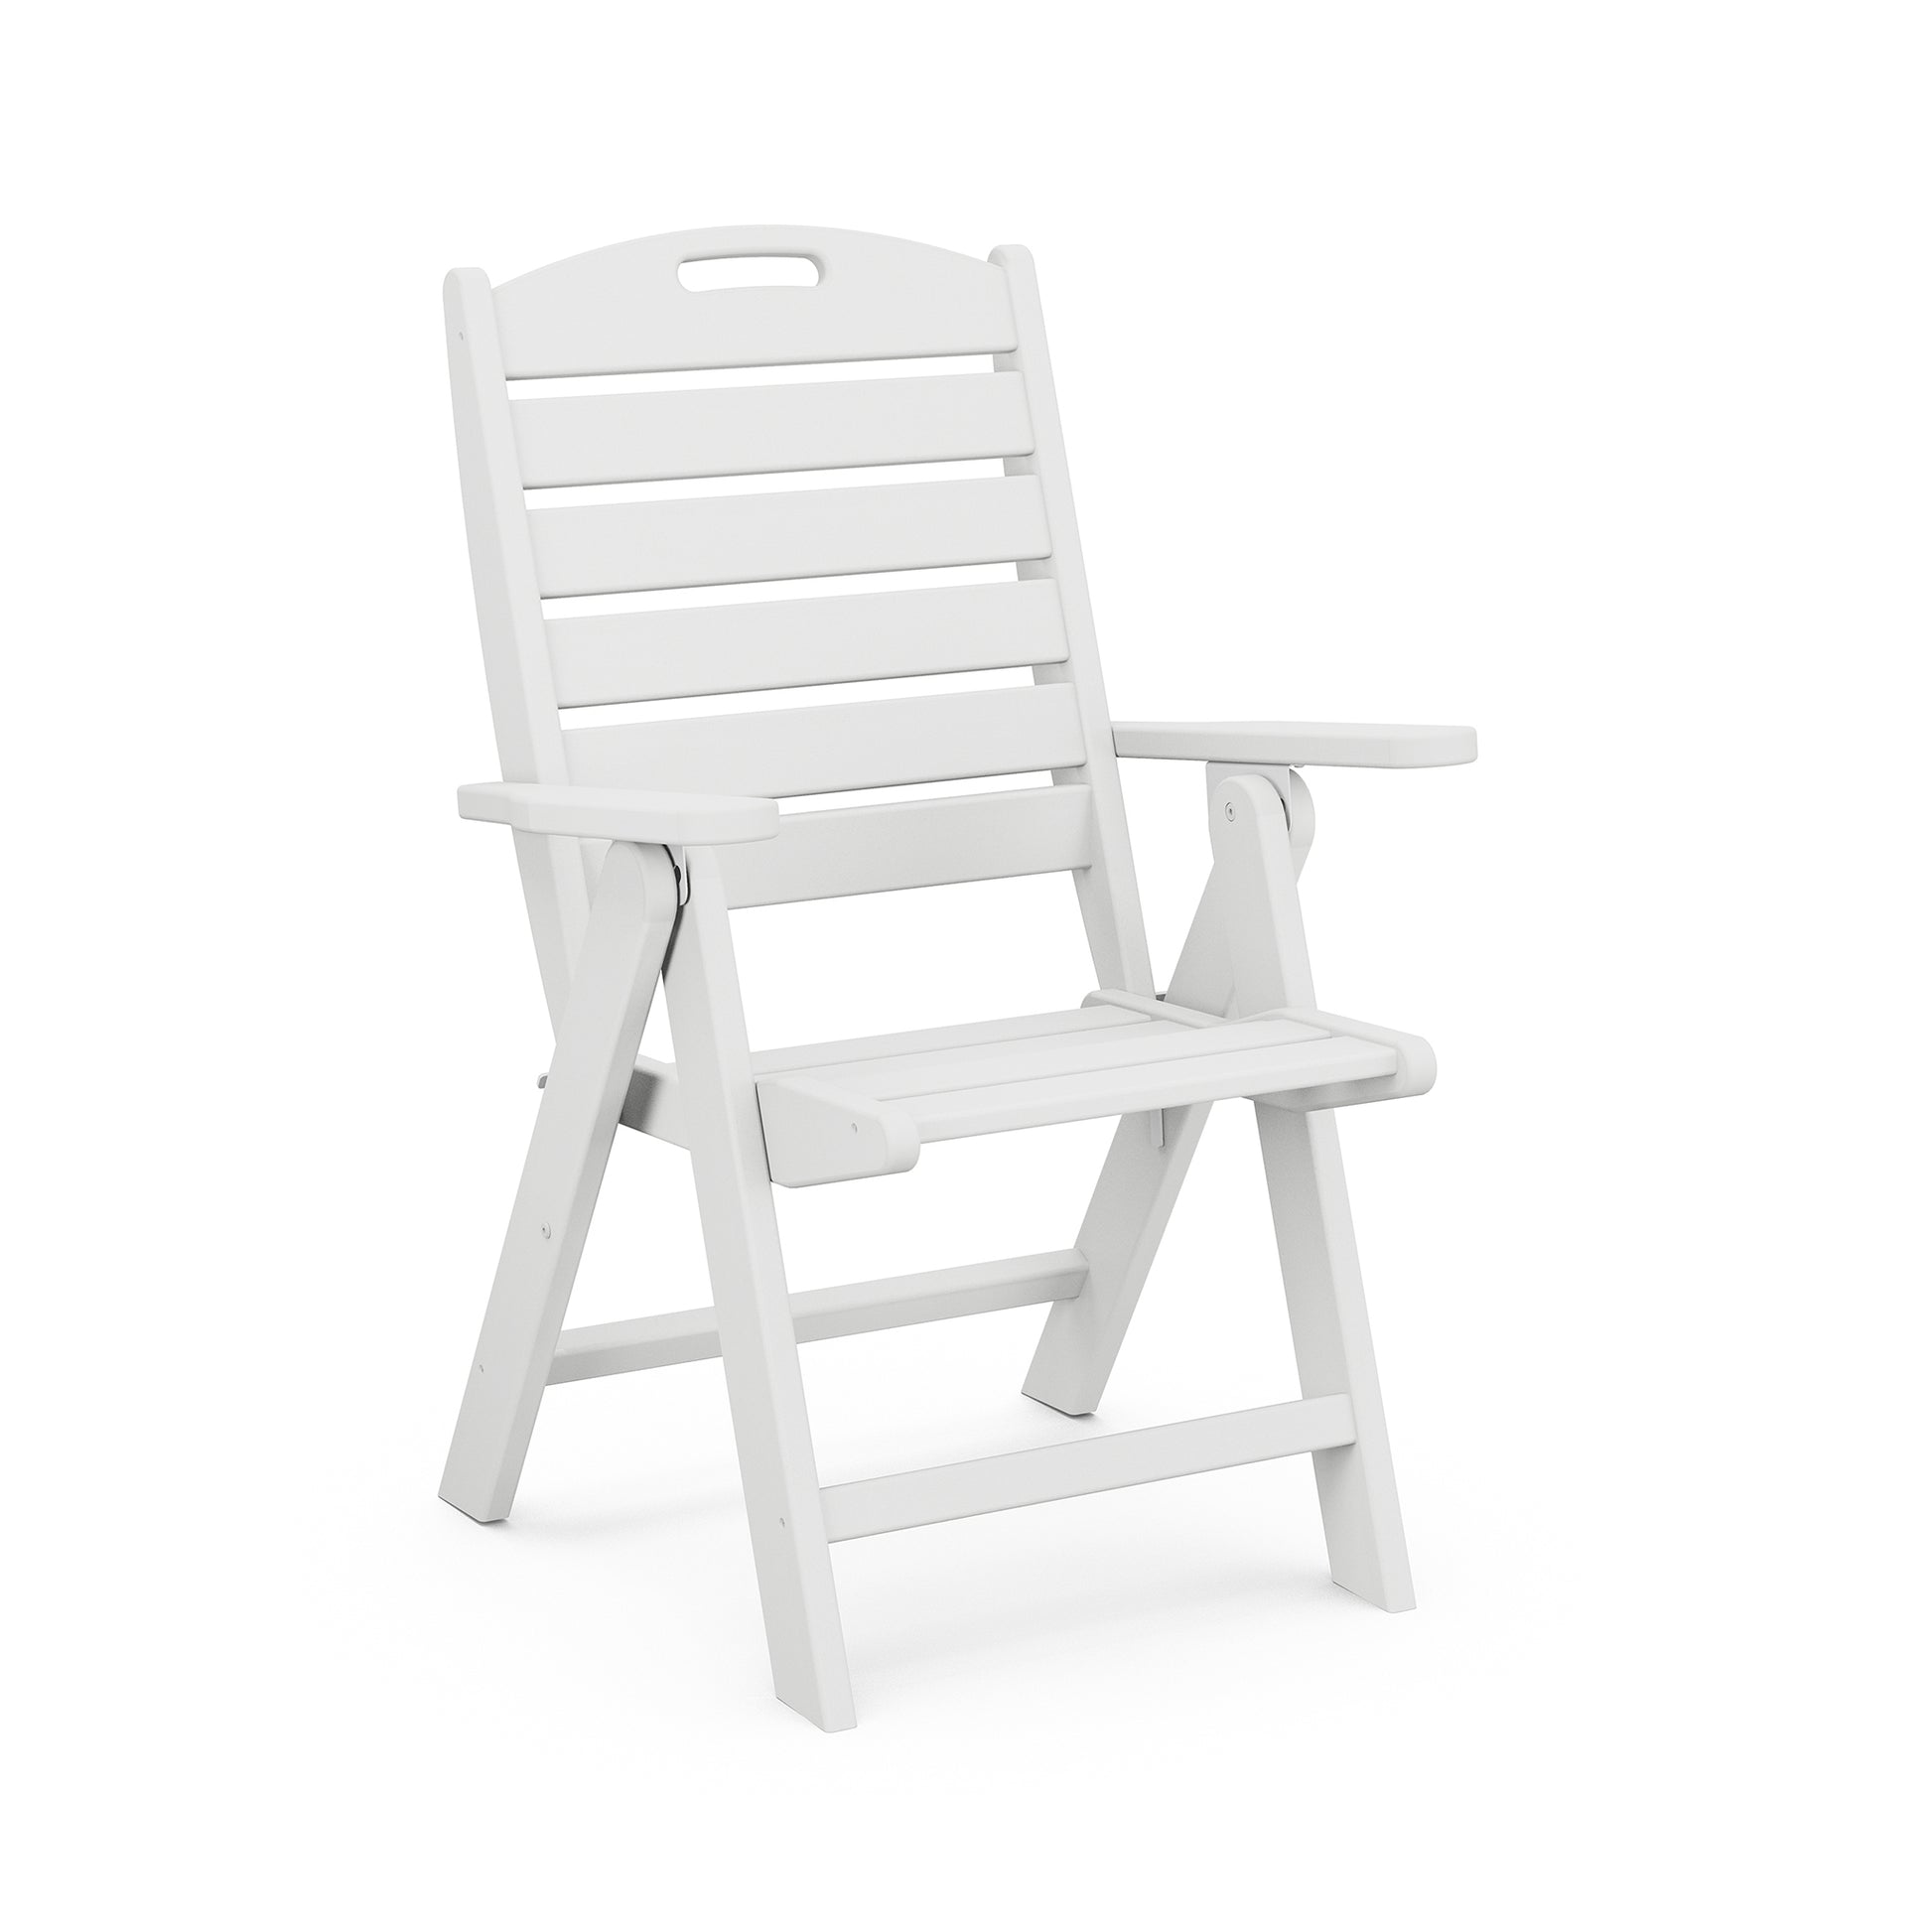 A white POLYWOOD® Nautical Highback Folding Dining Chair with armrests set against a white background.